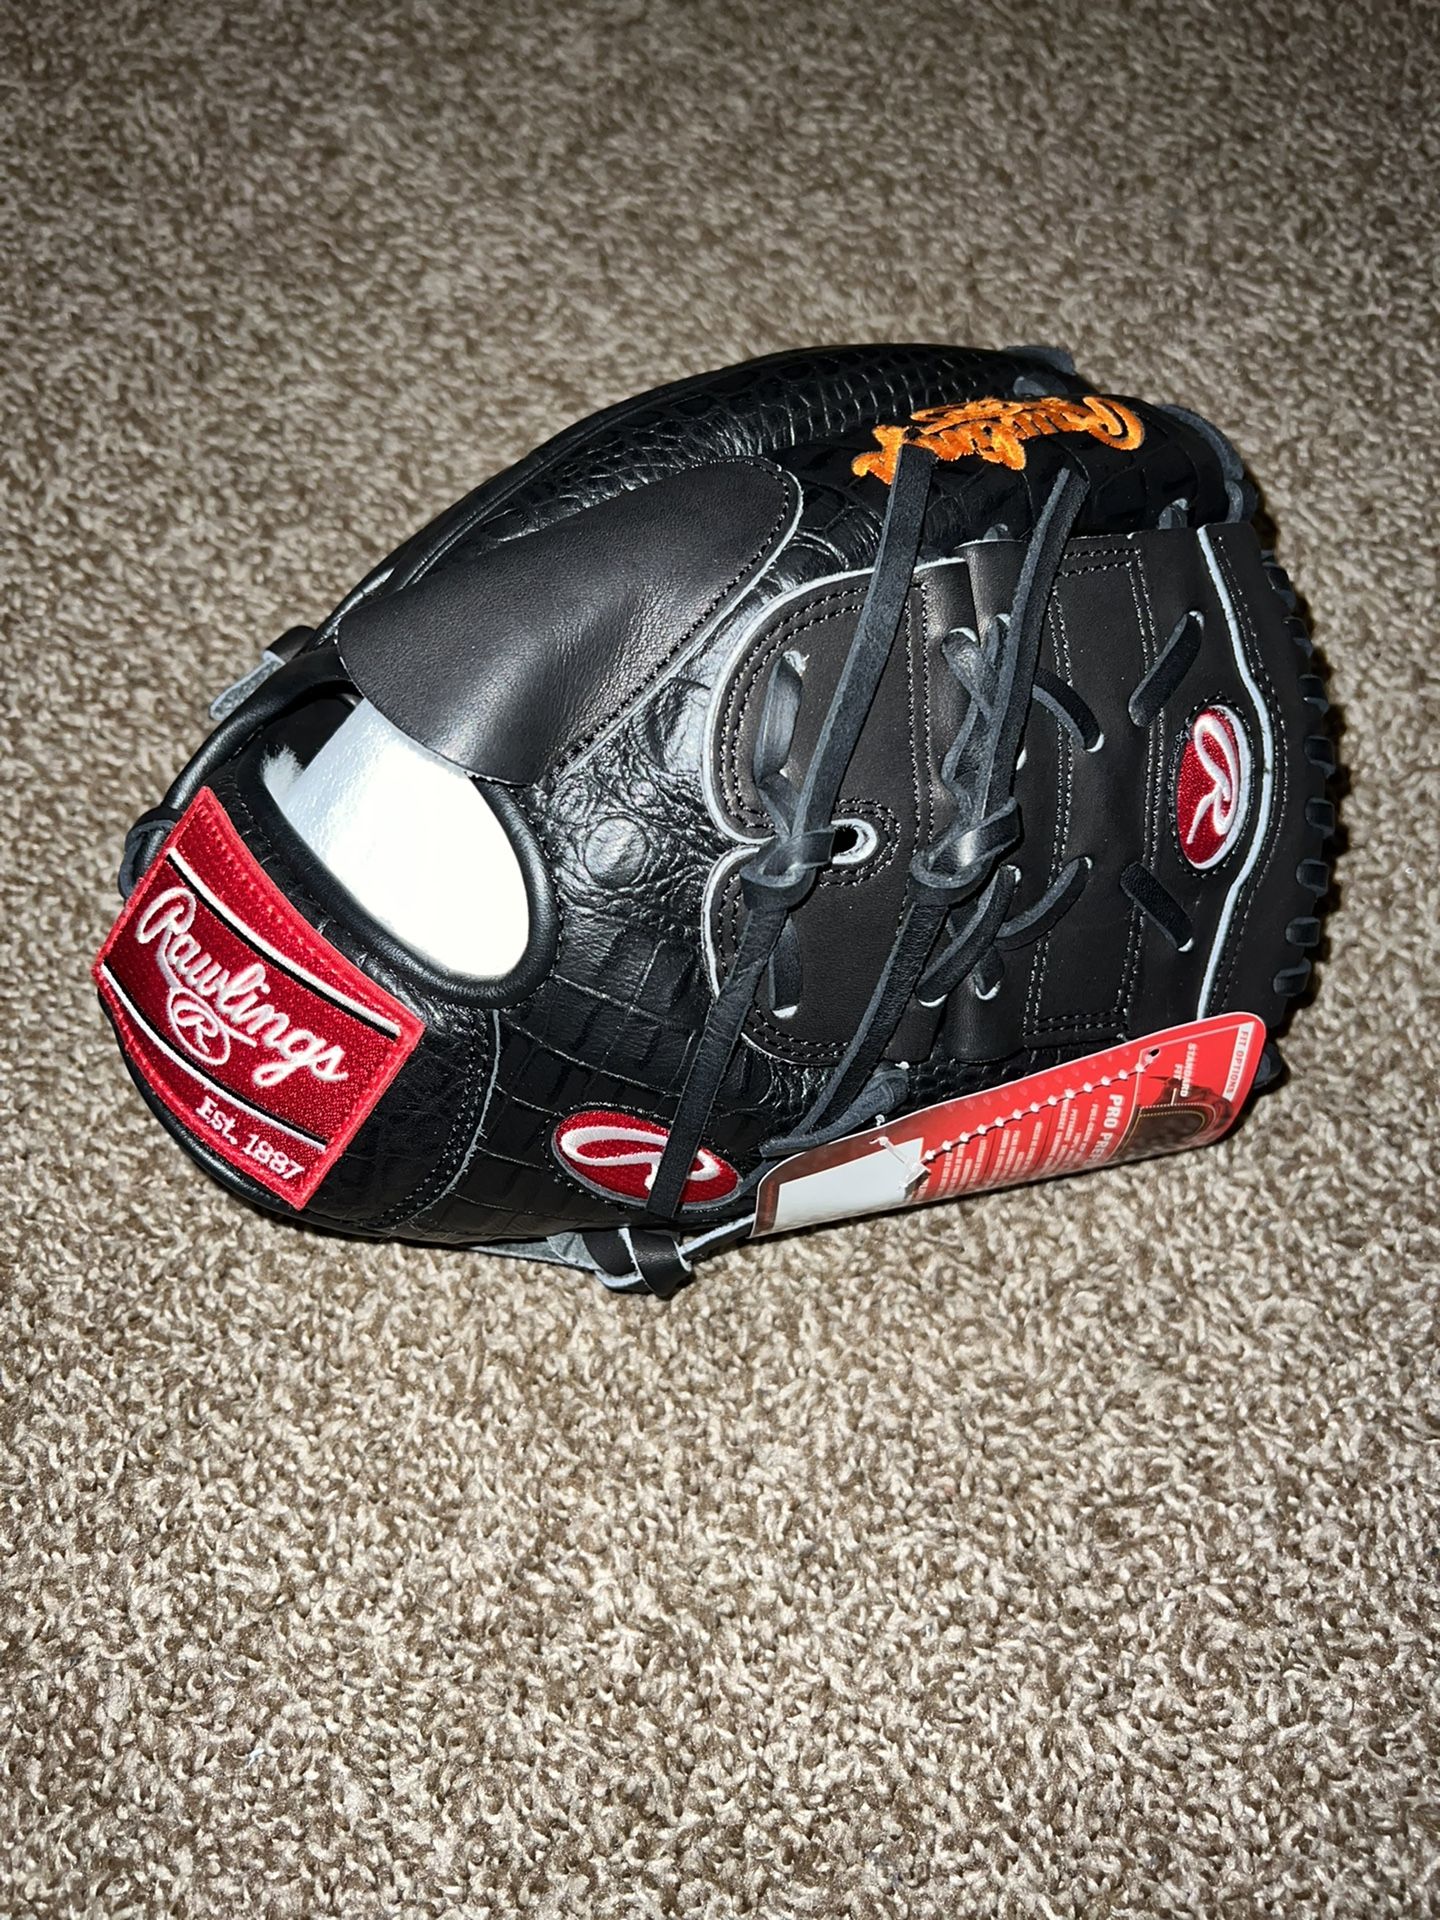 Rawlings Jacob DeGrom Exclusive Pro Preferred Baseball Glove 11.75 Inches 